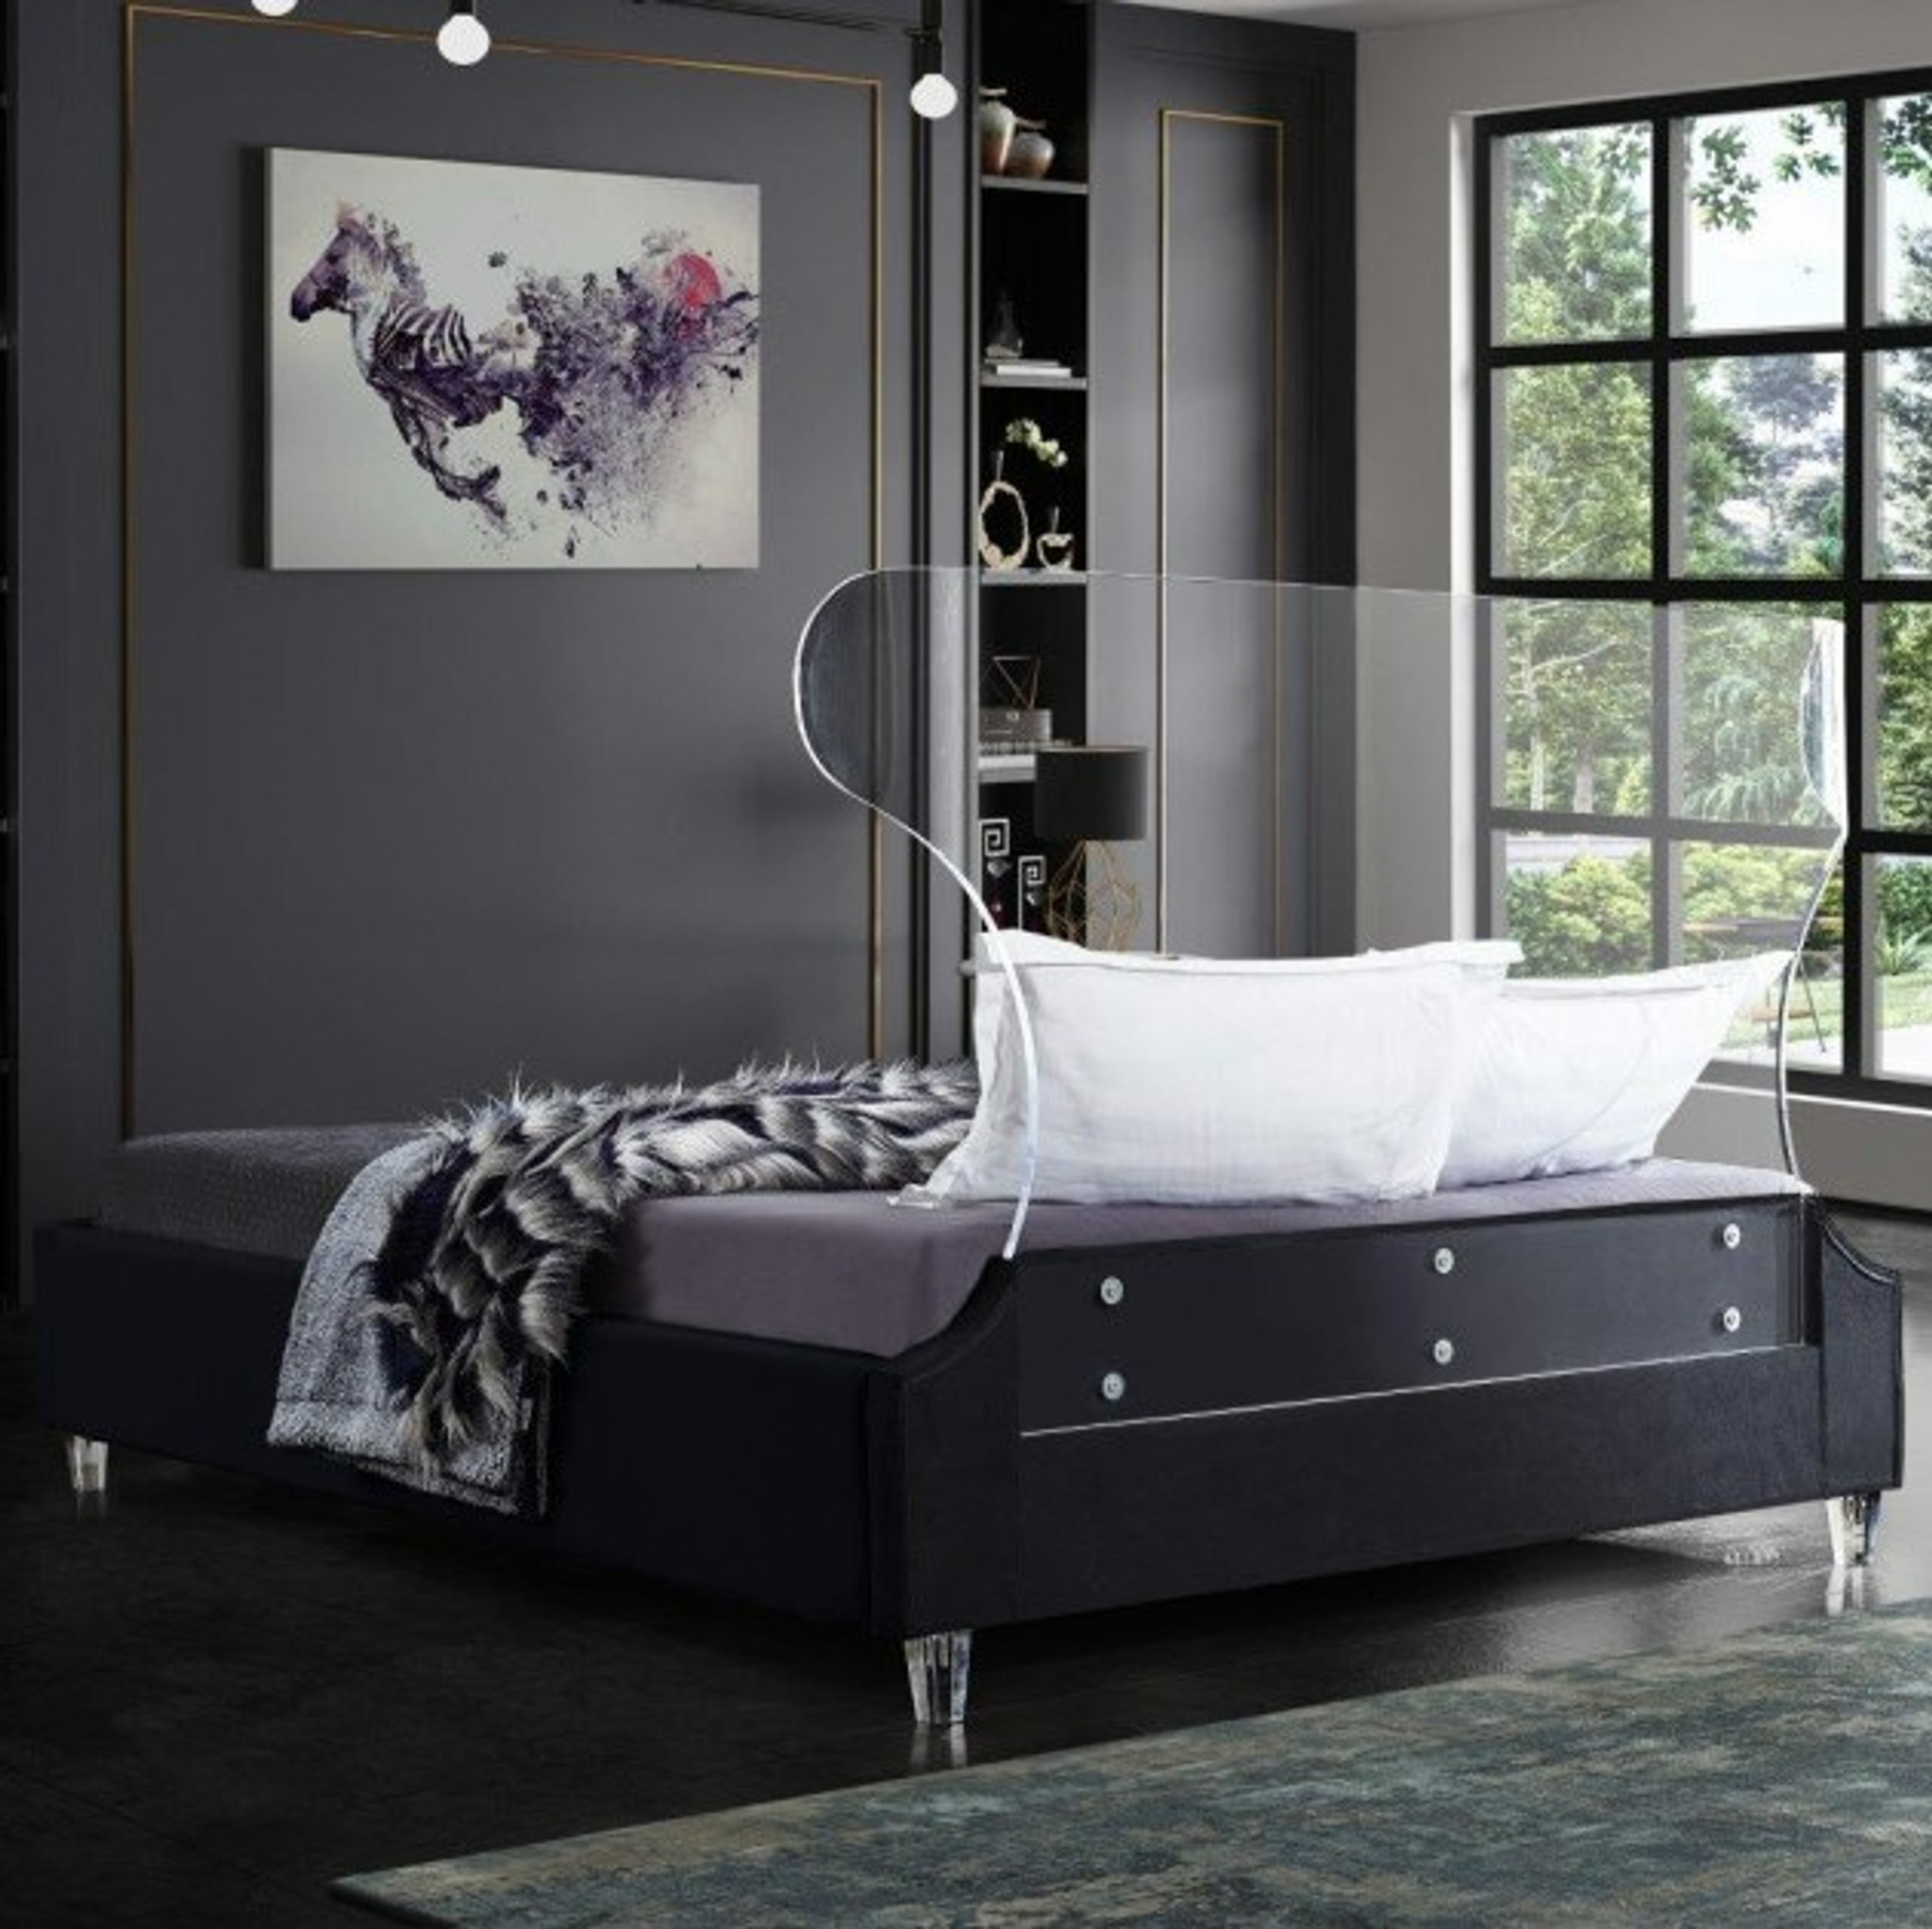 Lucite Wing Headboard Bed with Black Upholstered Frame